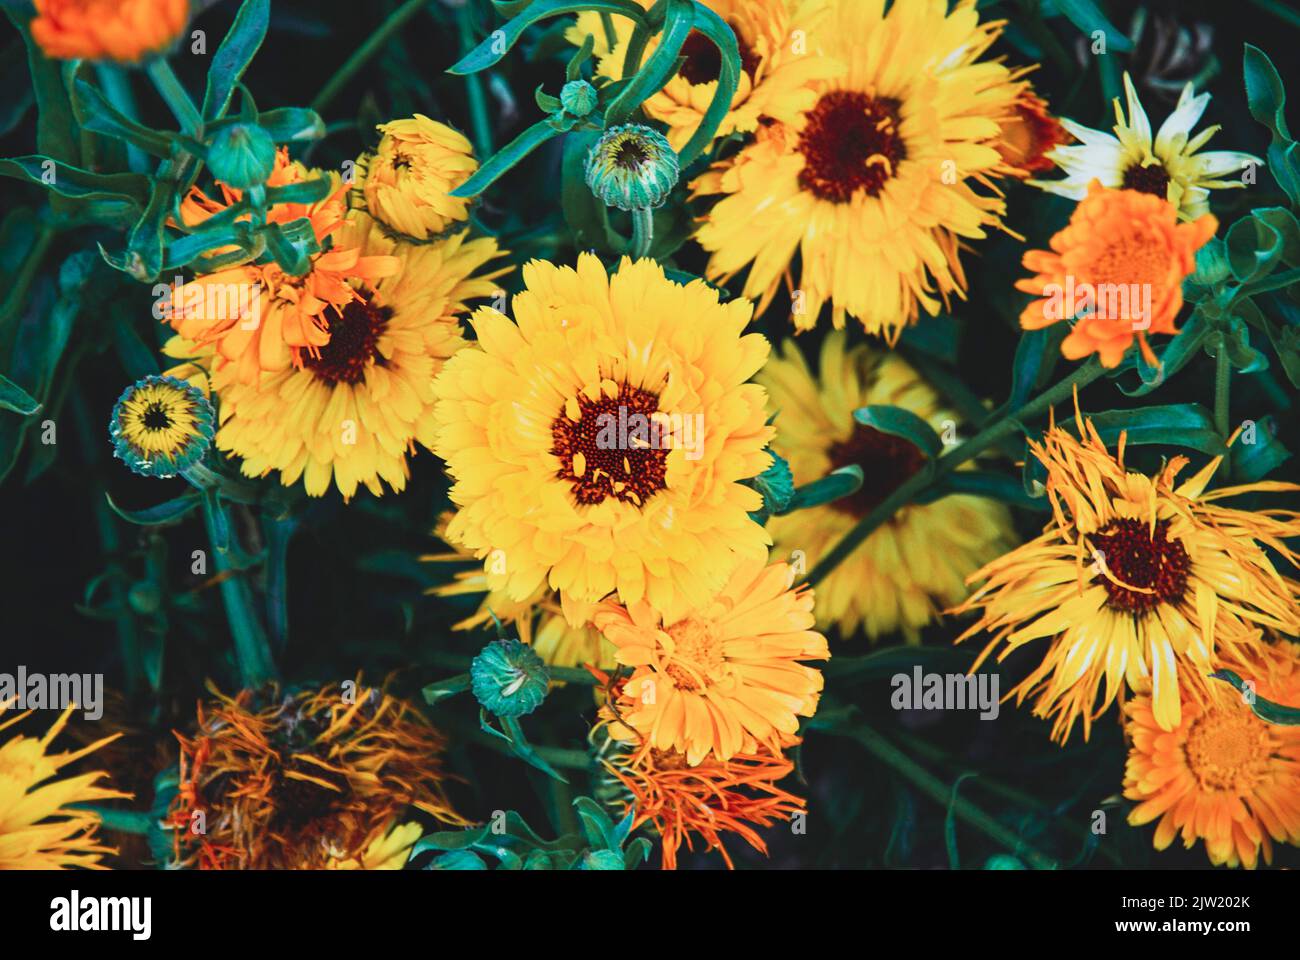 Garden Marigold flowers, Calendula officinalis plants with flowers and seeds in the garden, dark and moody Stock Photo